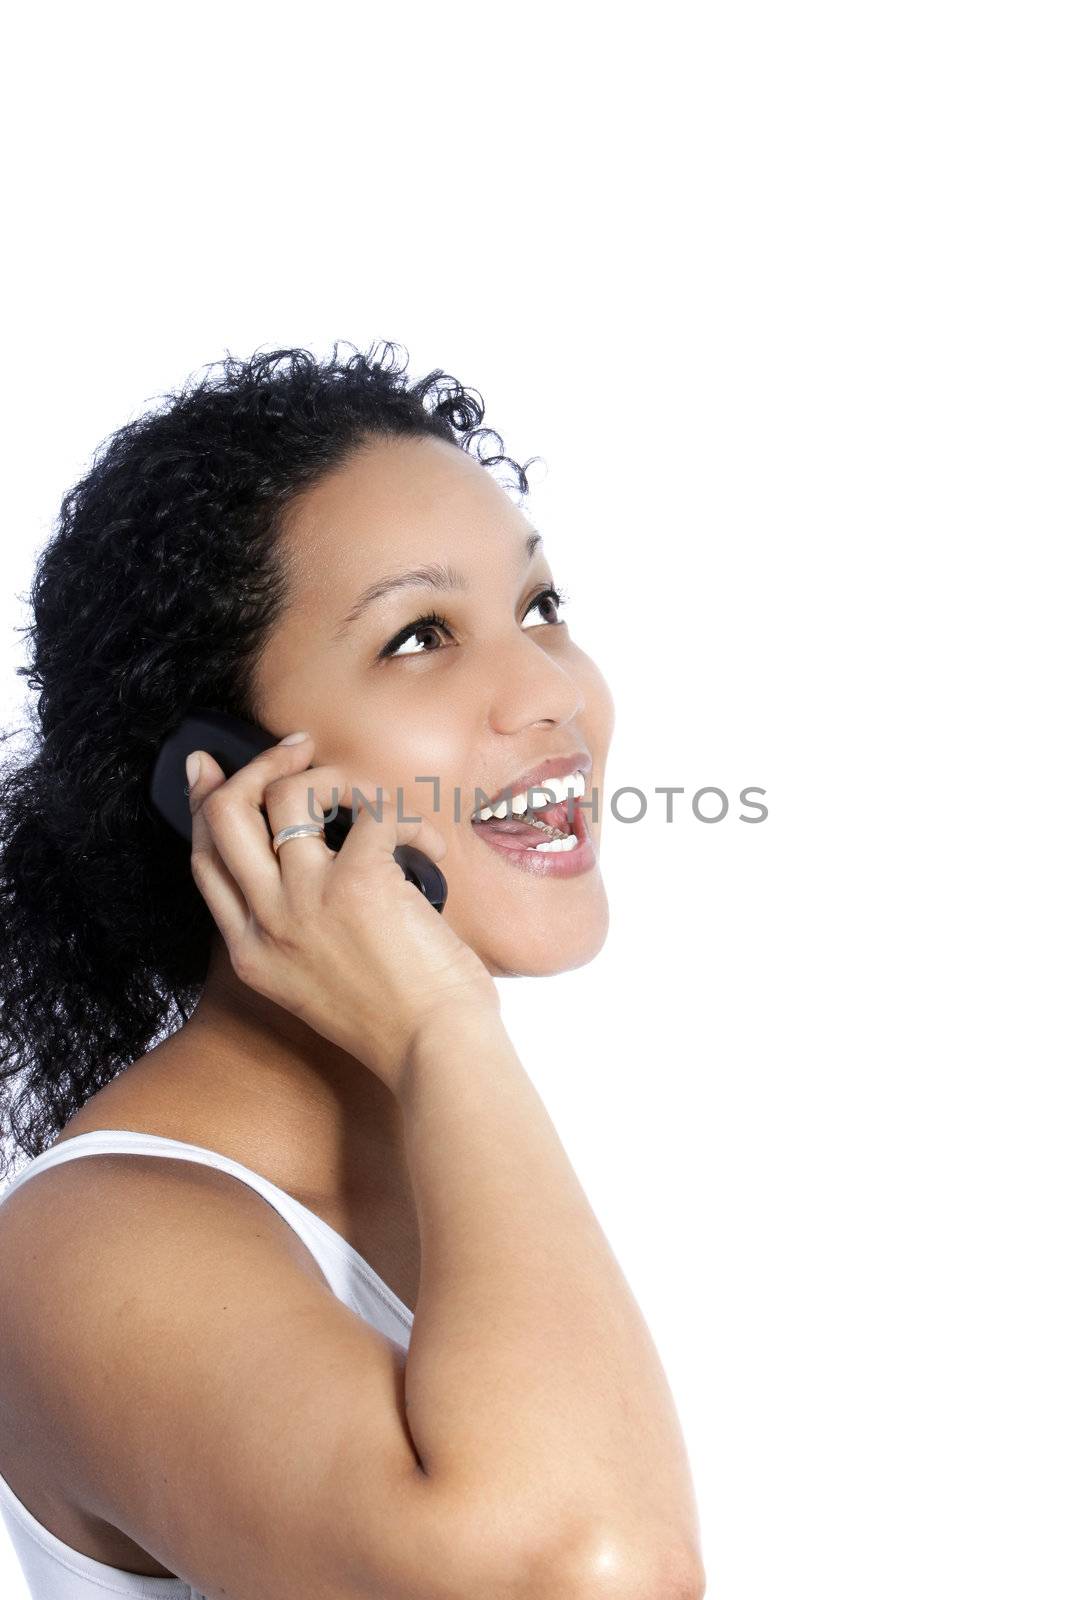 Beautiful woman laughing on the phone by Farina6000